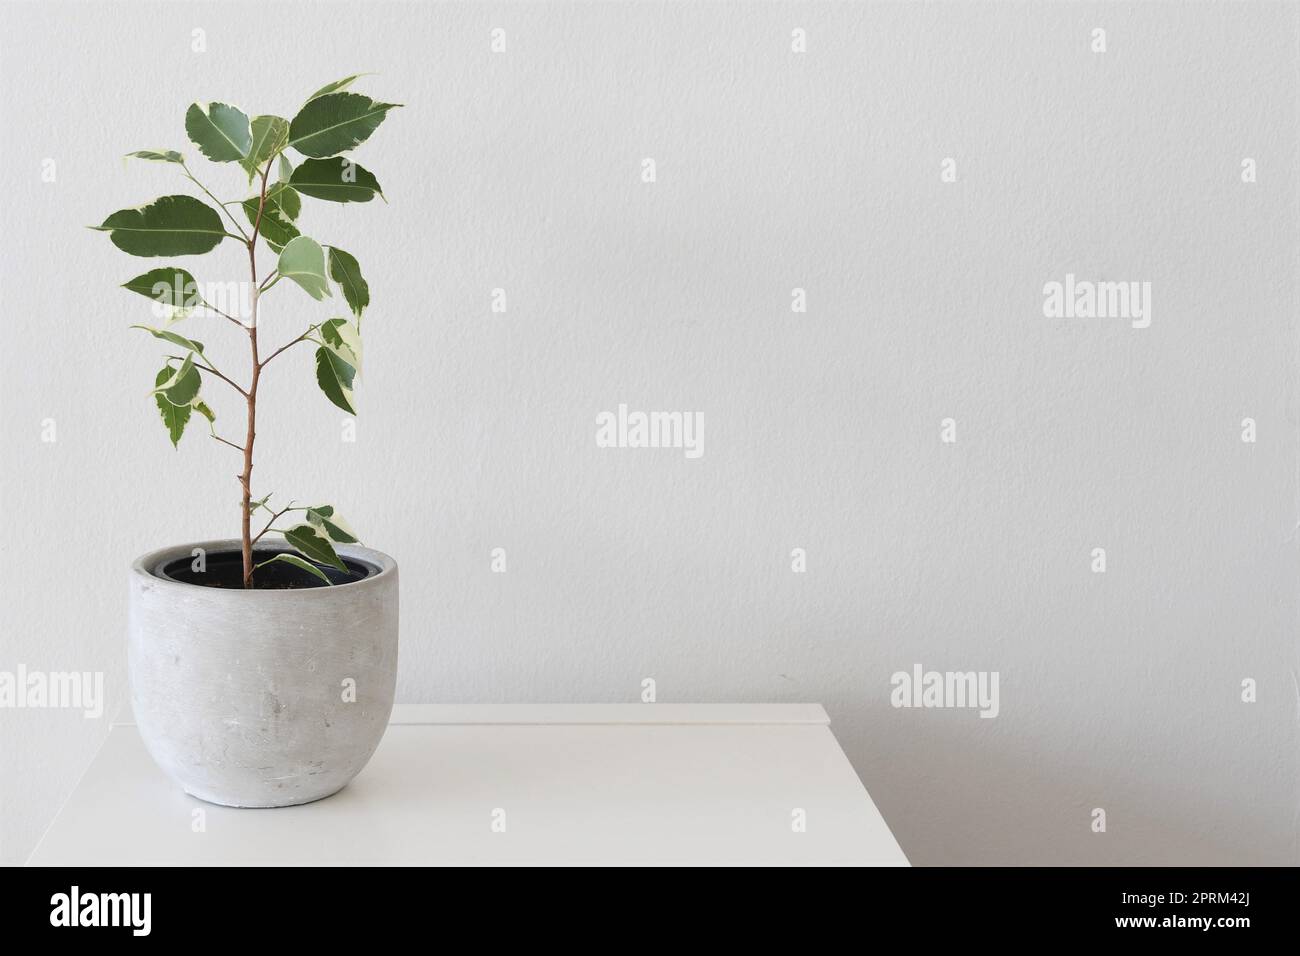 Ficus benjamina variegata, variegated weeping fig, houseplant with white and green leaves, isolated on a white background. Landscape orientation. Stock Photo